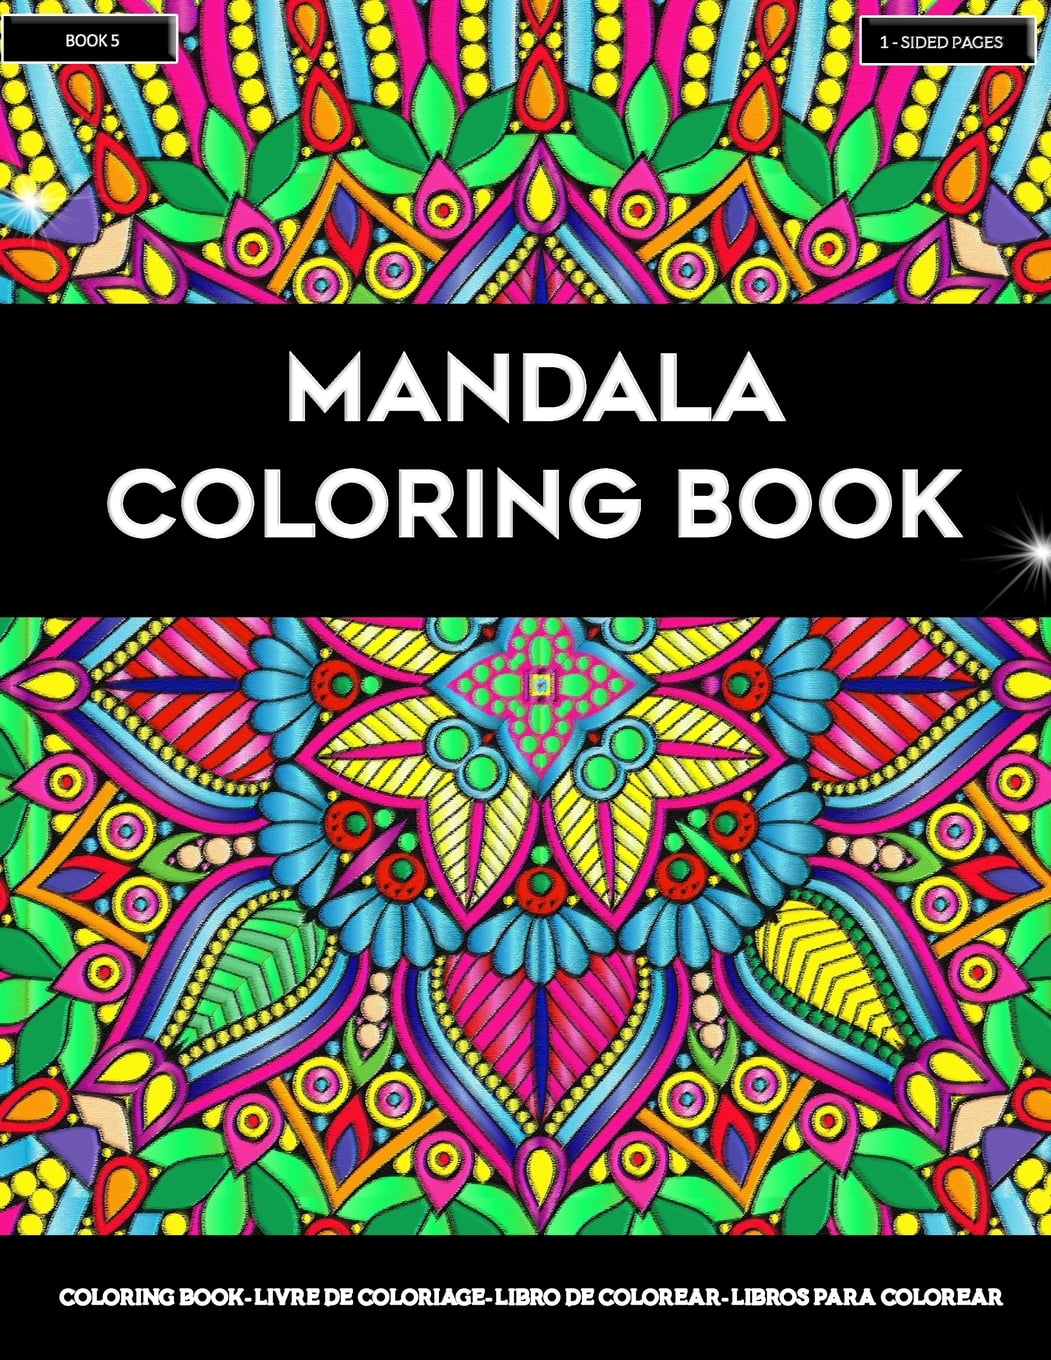 Mandala Coloring Book Fun and Easy Coloring Pages for Grown Ups Featuring  Beautiful Mandala Designs for Stress Relief, Relaxation and Boost ...